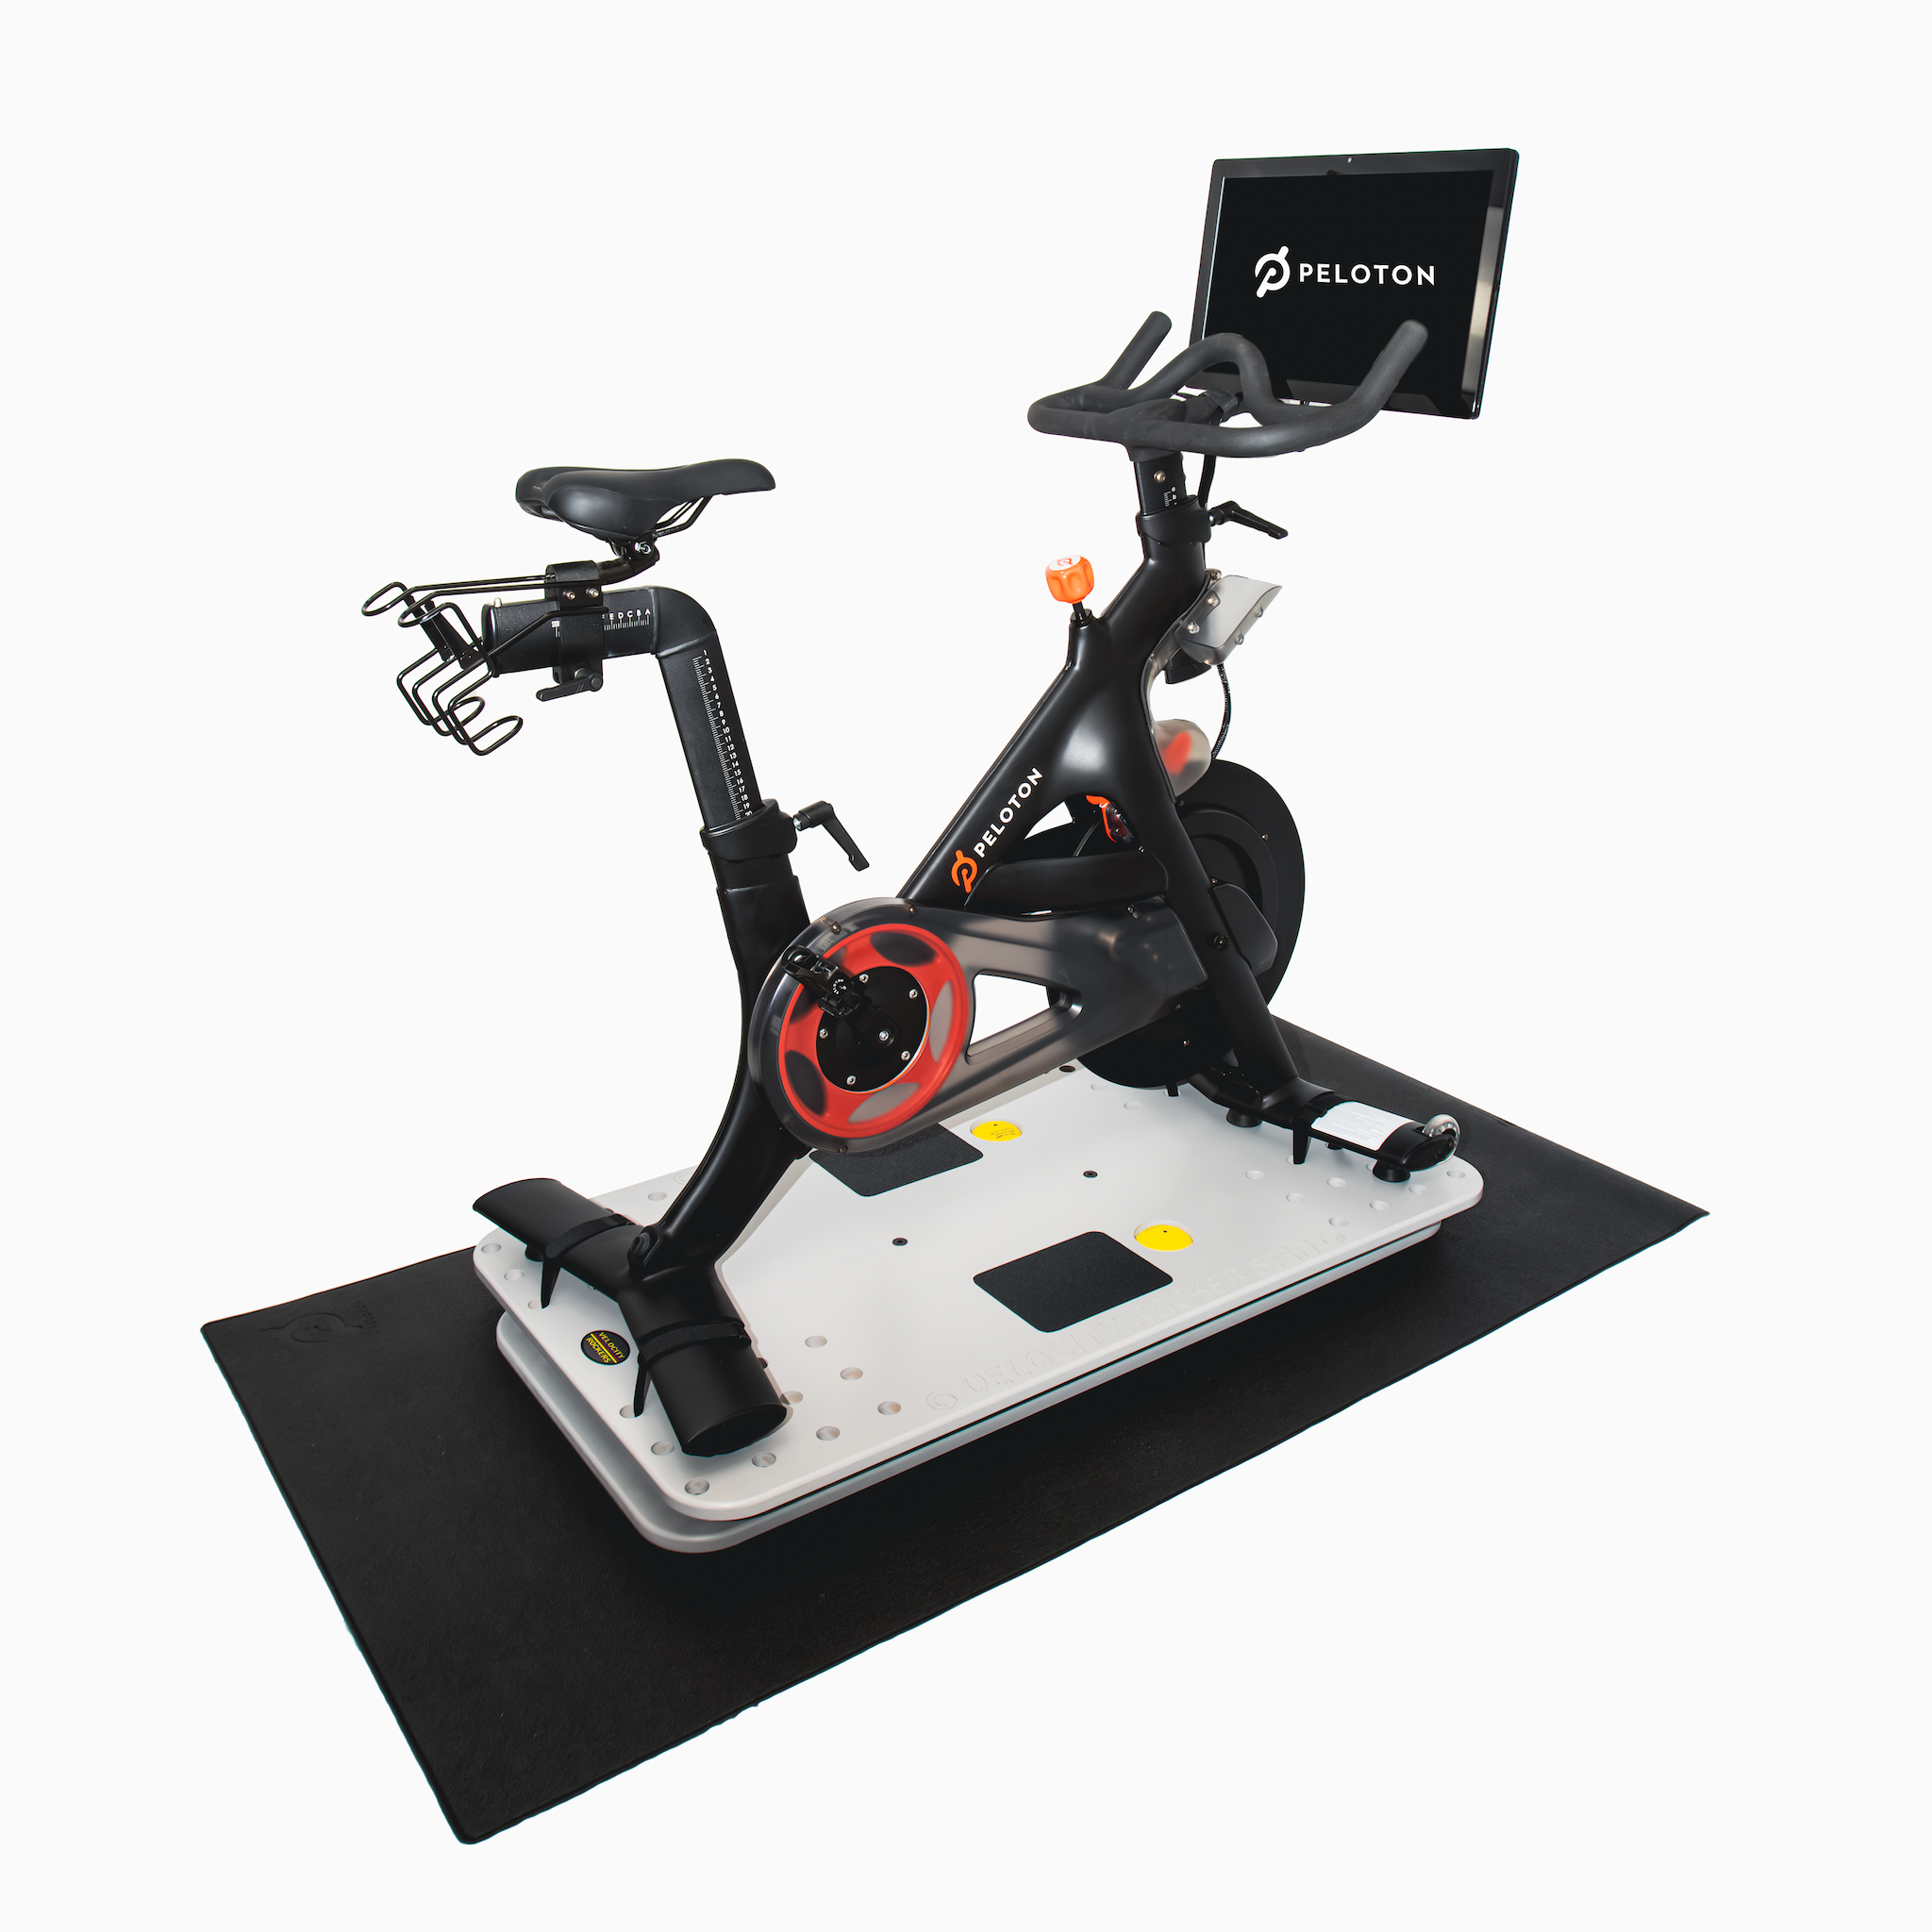 The Velocity Rocker Spin with the Peloton bike mounted on it.